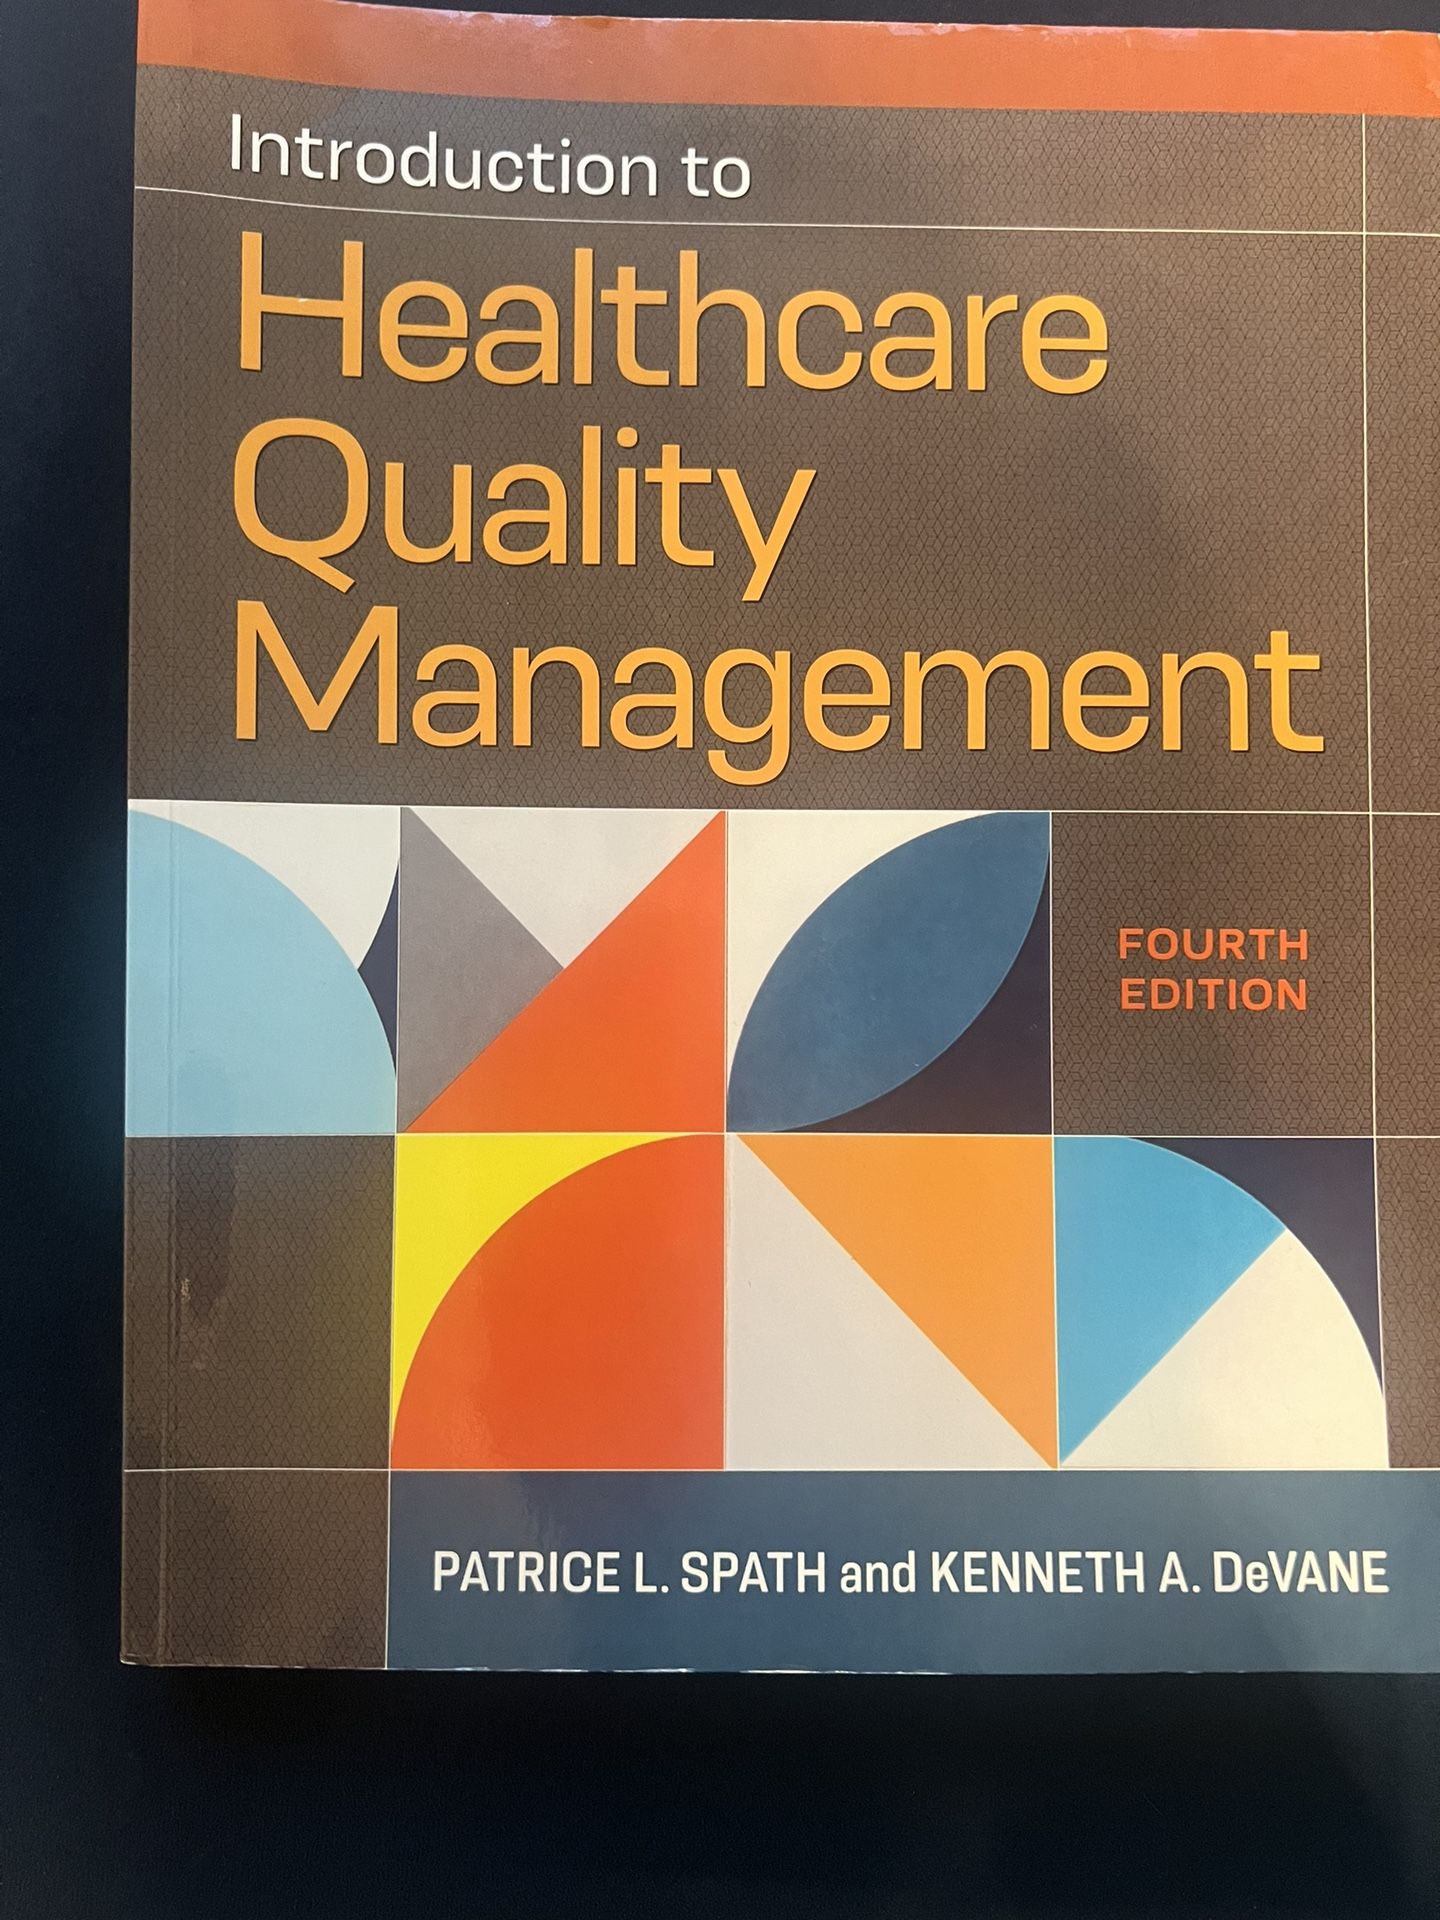 Healthcare Quality Management College Book